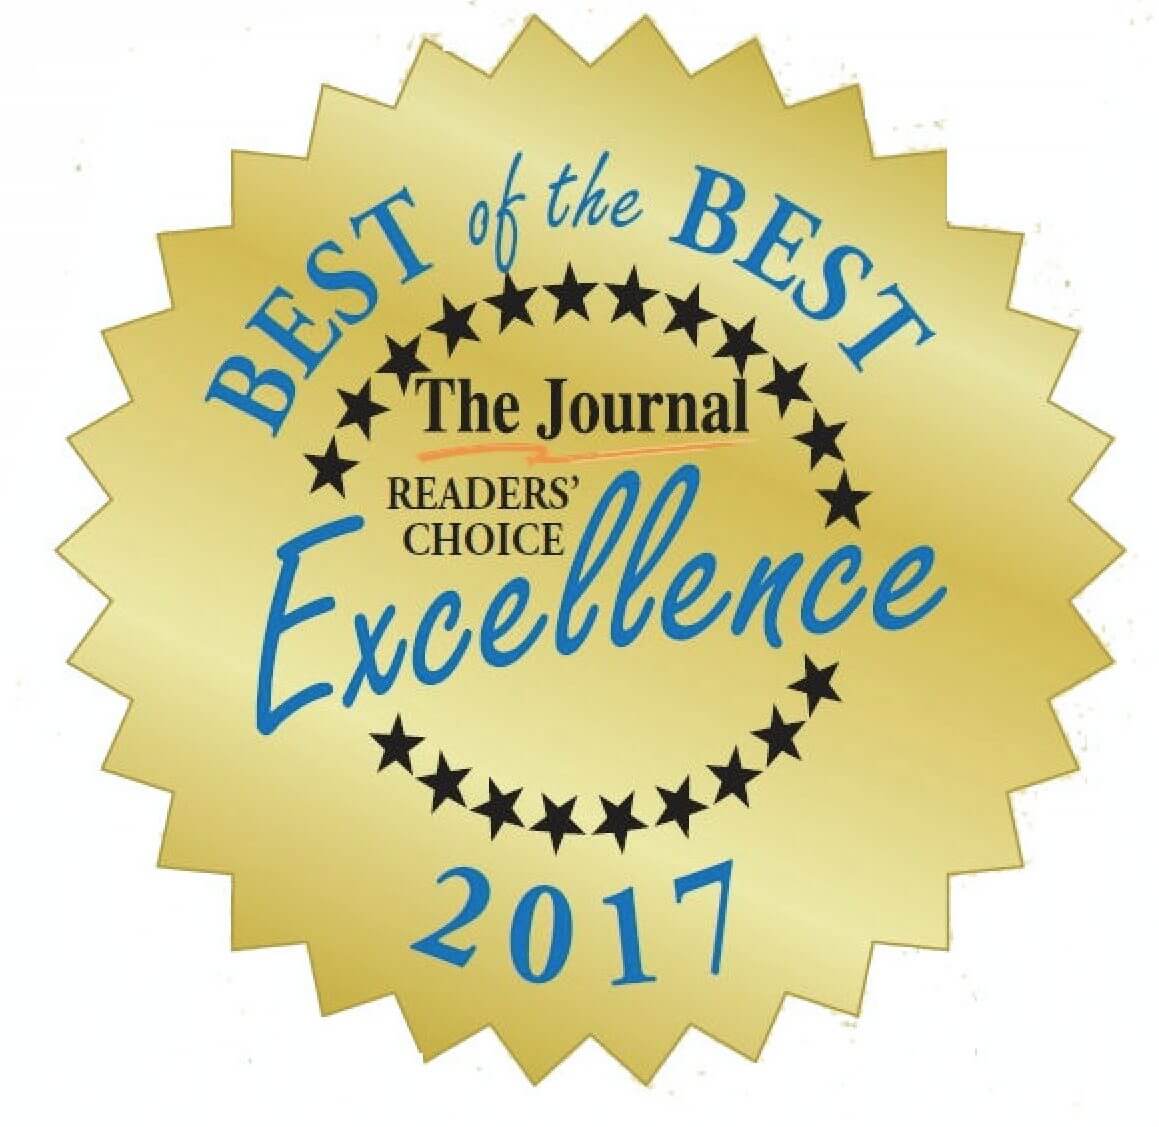 The Journal best of the best 2017